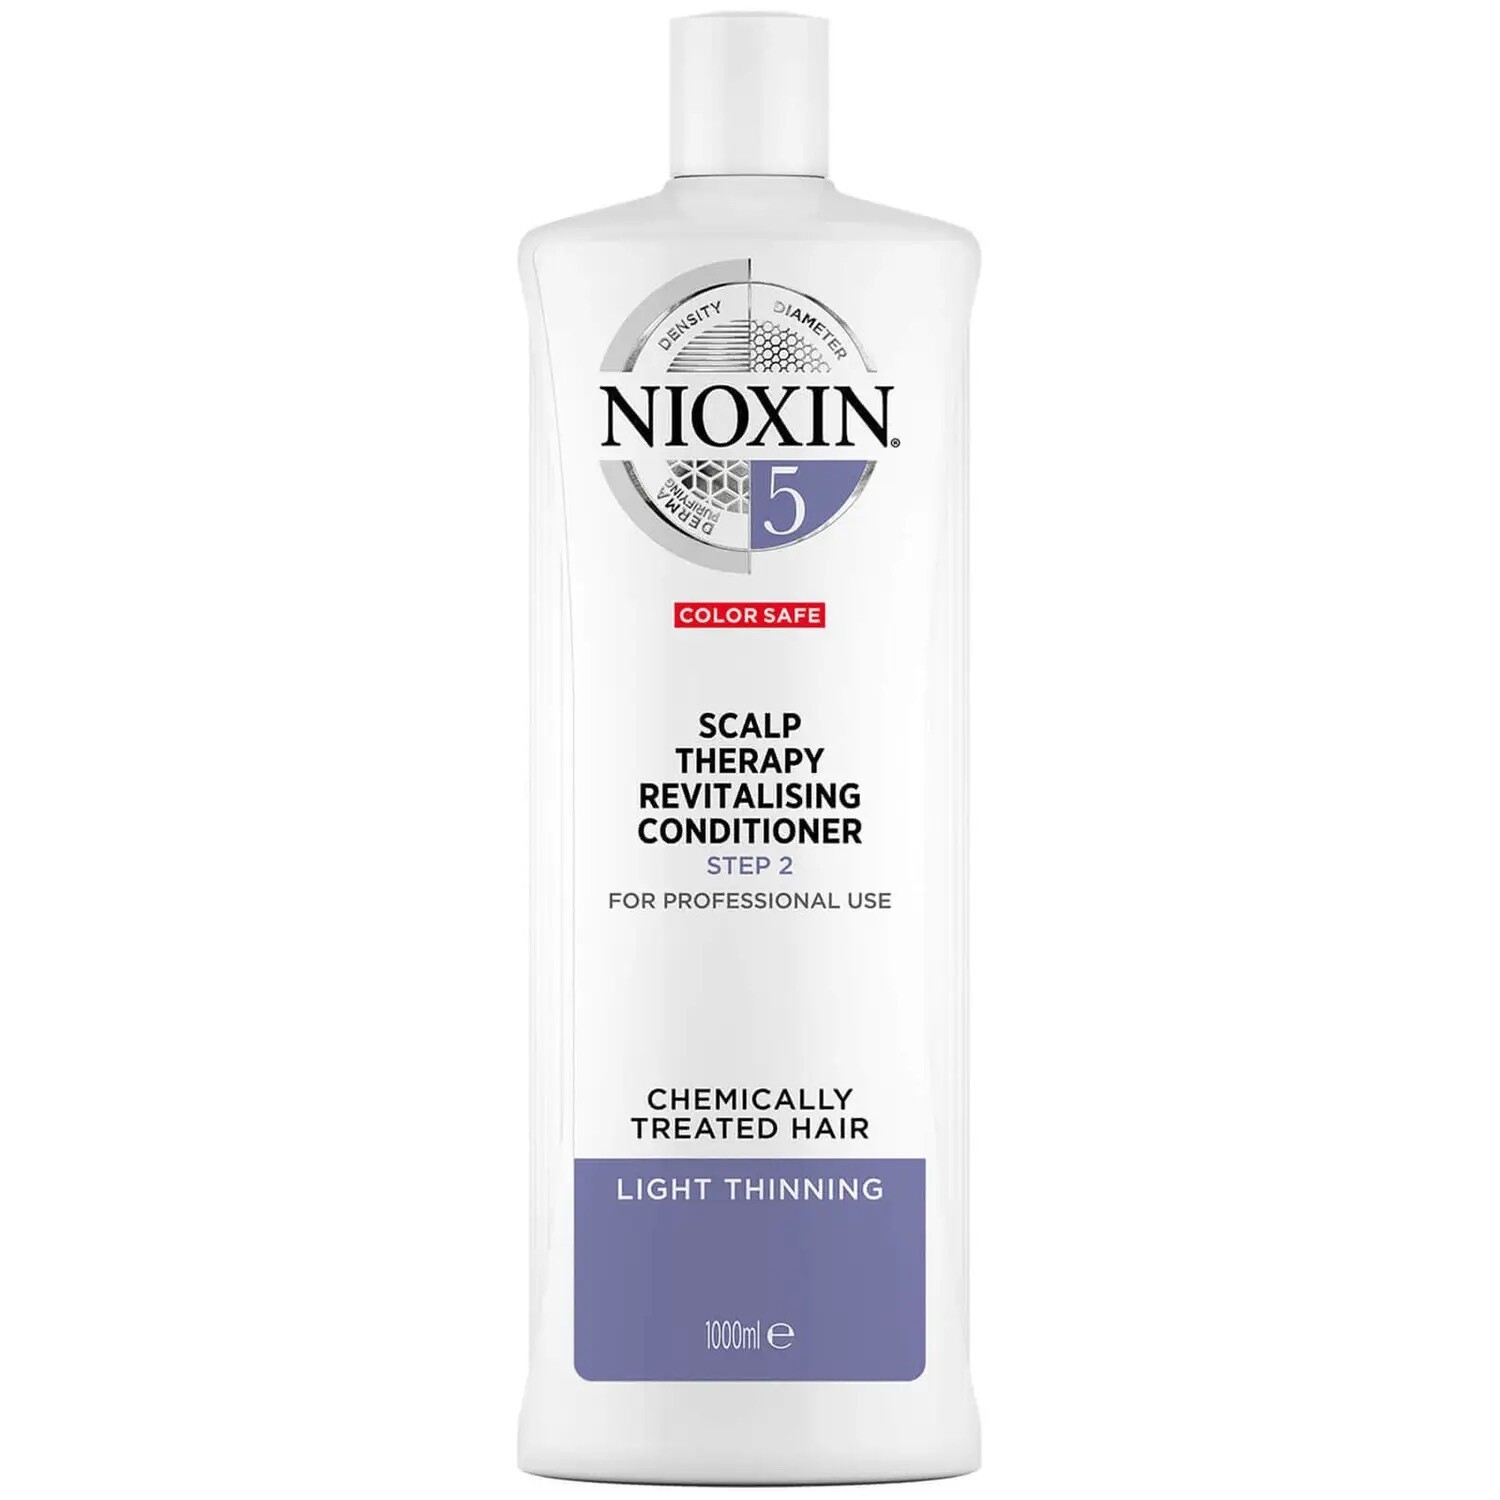 Nioxin Scalp Therapy Condtioner System 5